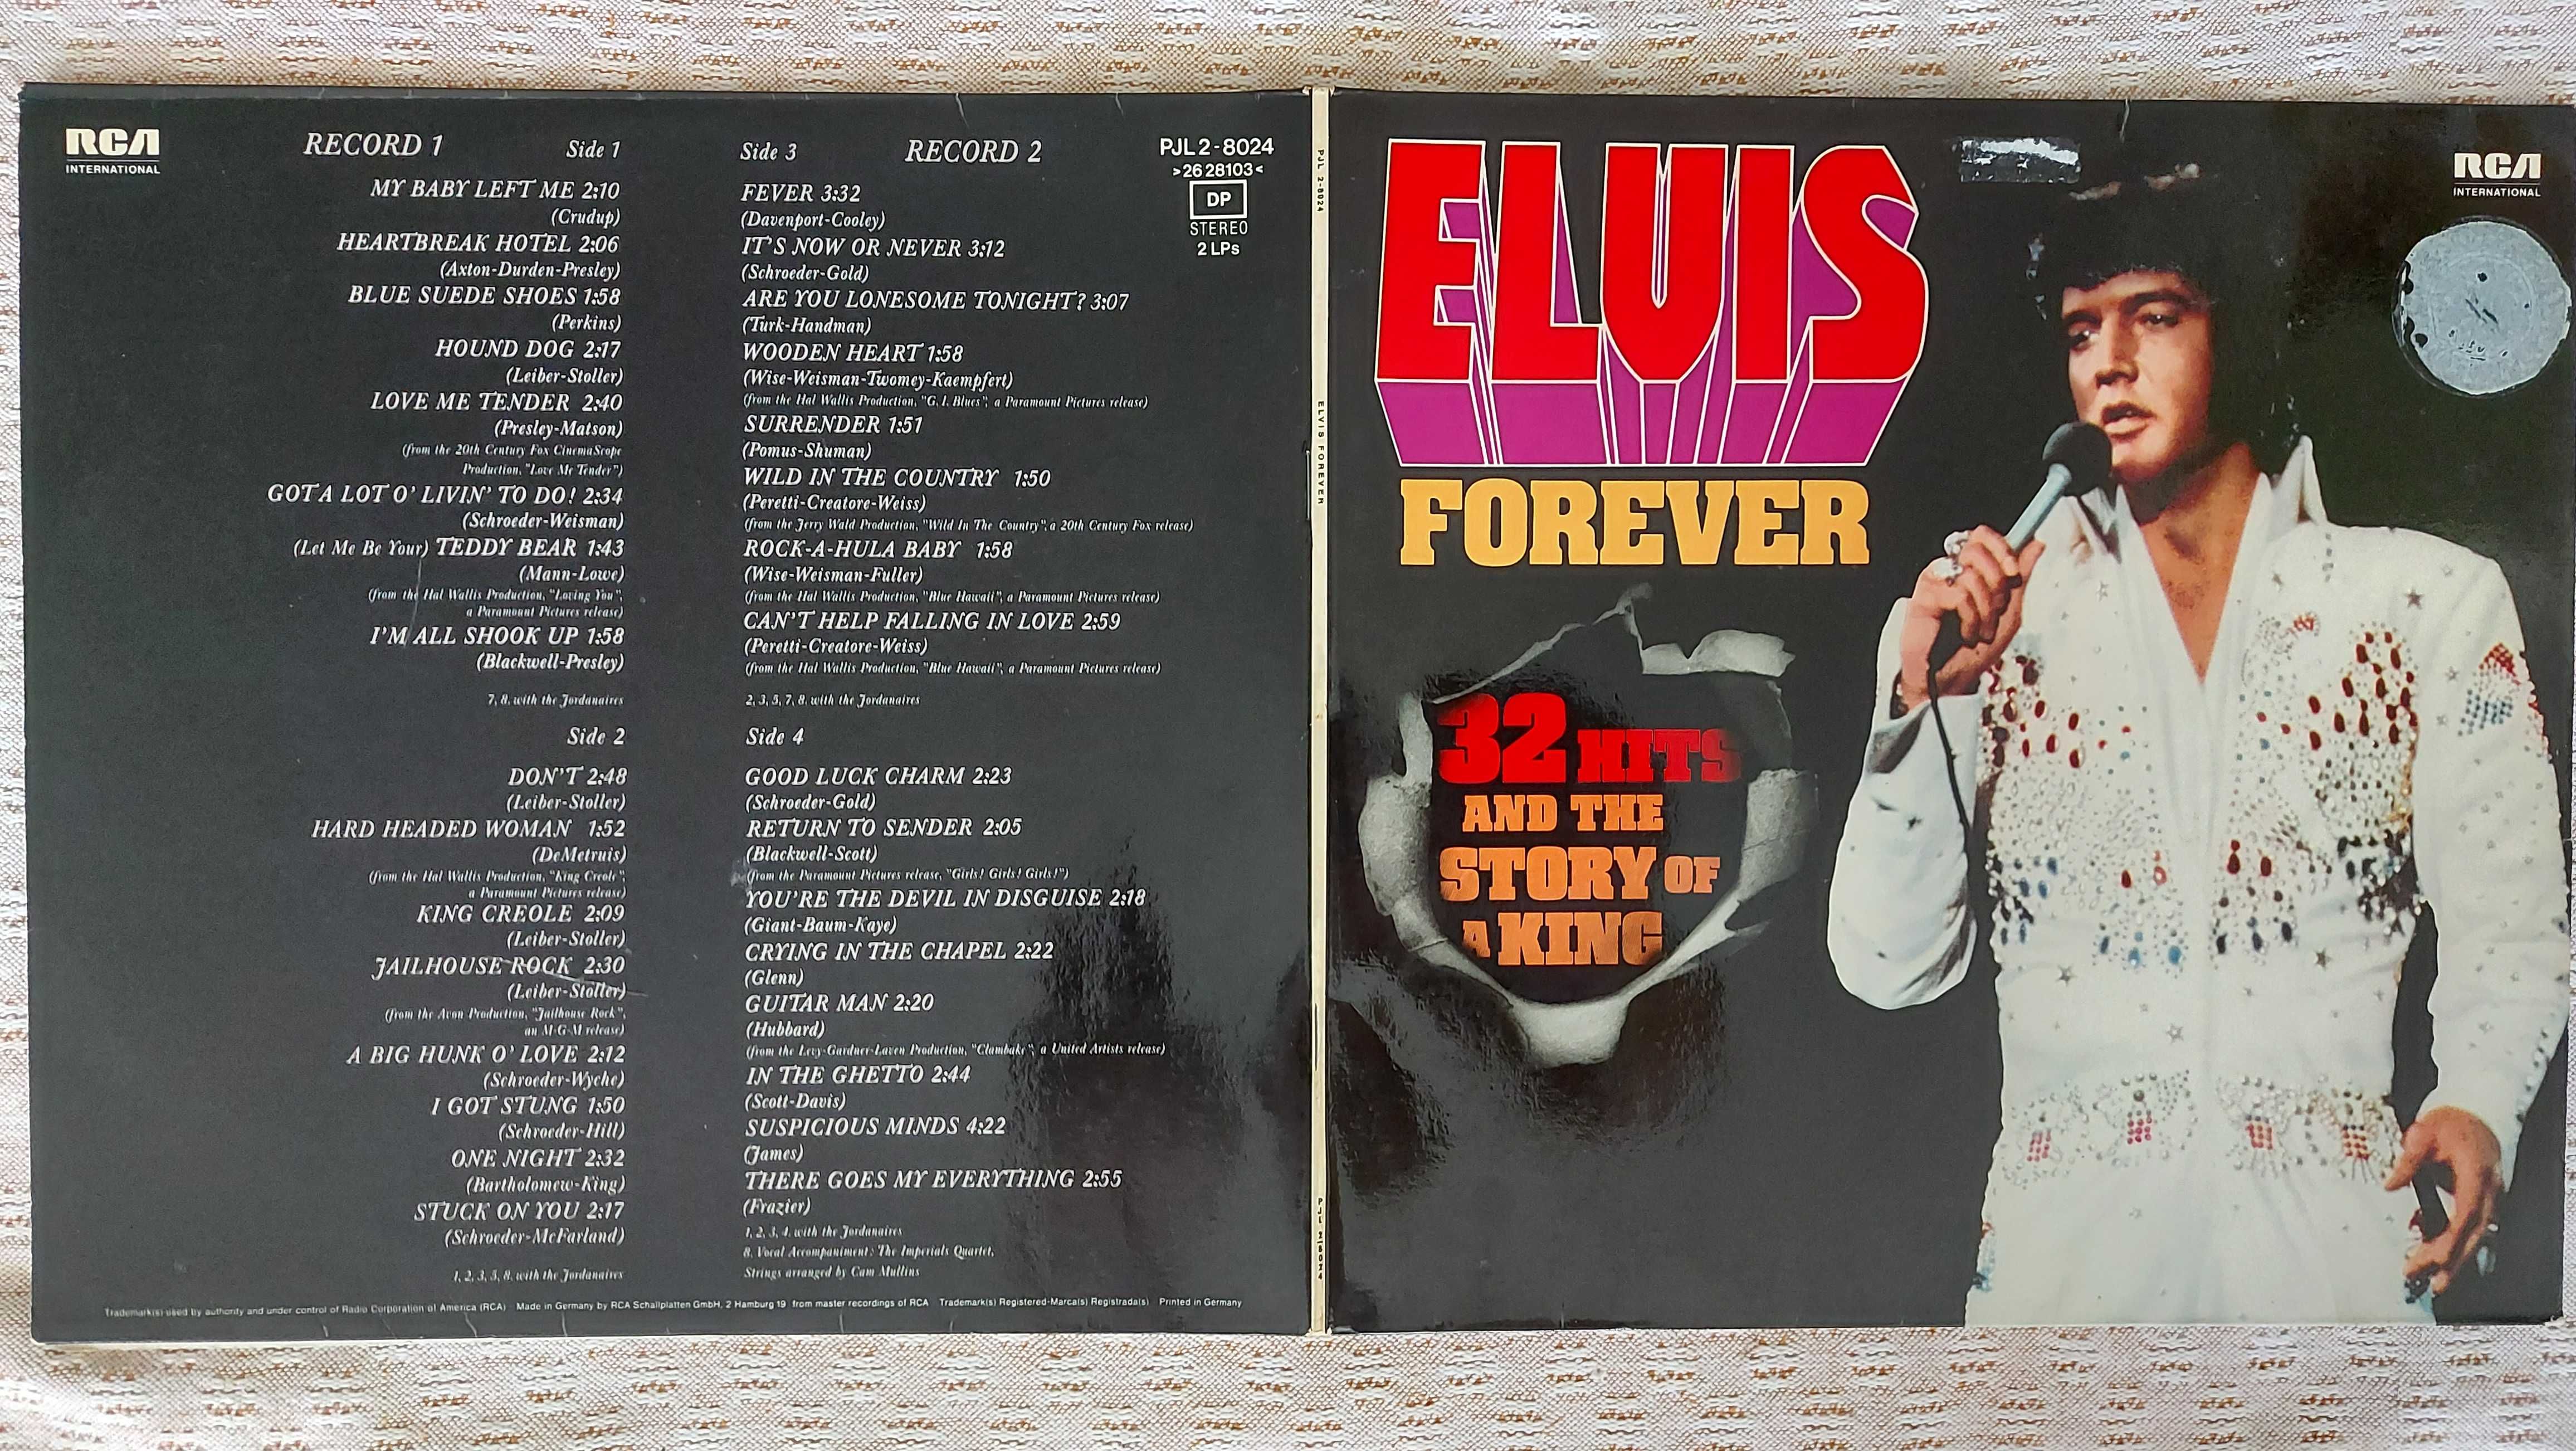 Elvis* Elvis Forever (32 Hits And The Story Of A King) 1974 Ger EX+/EX